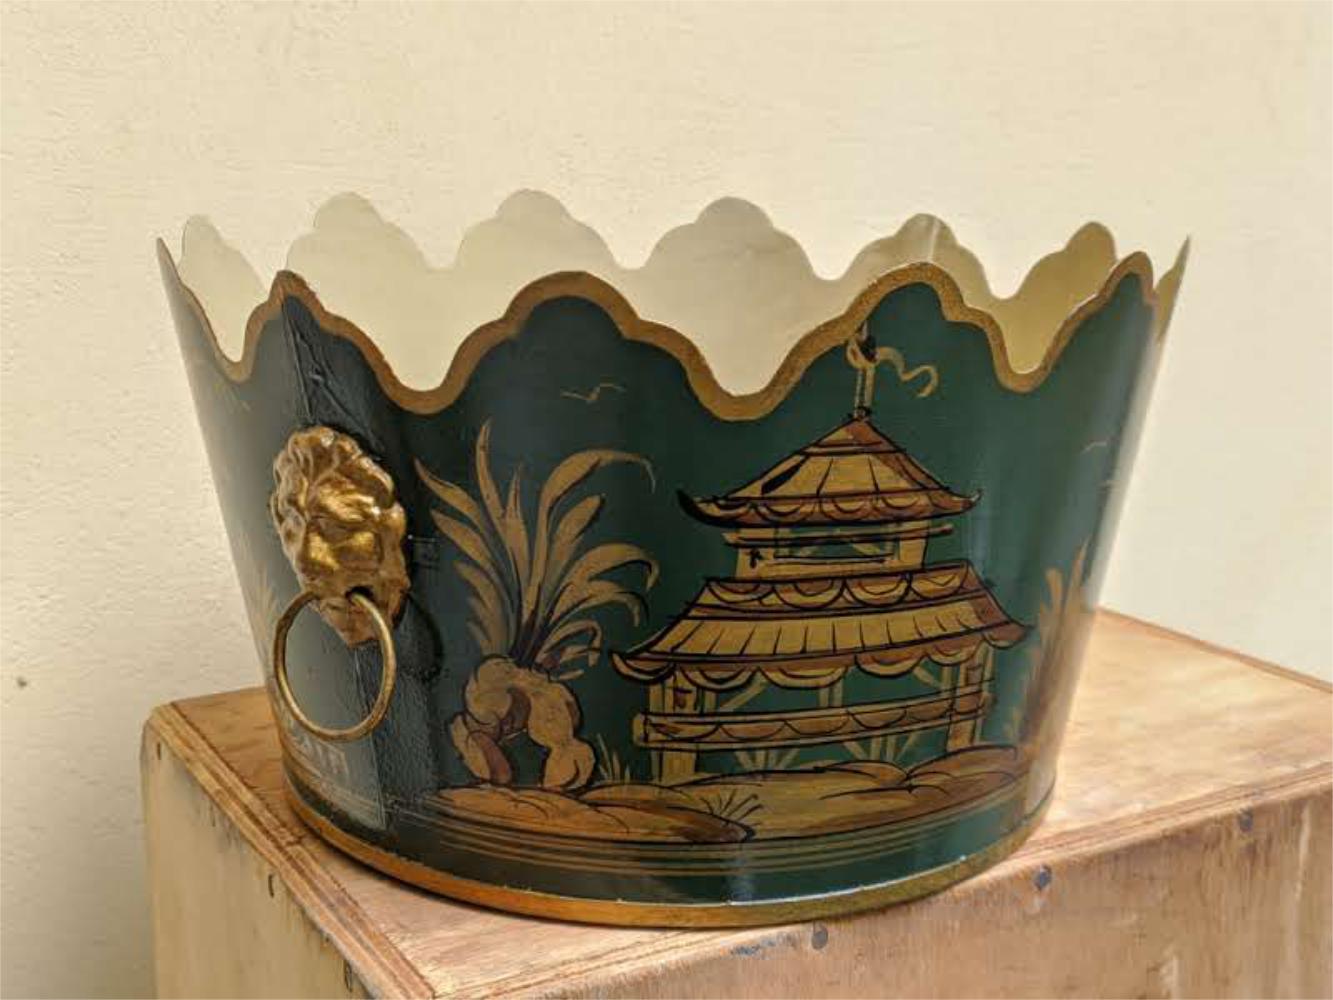 Limited production of French tole hand painted cachepot in chinoiserie style. Available in different colors. Conic shaped with scalloped top.